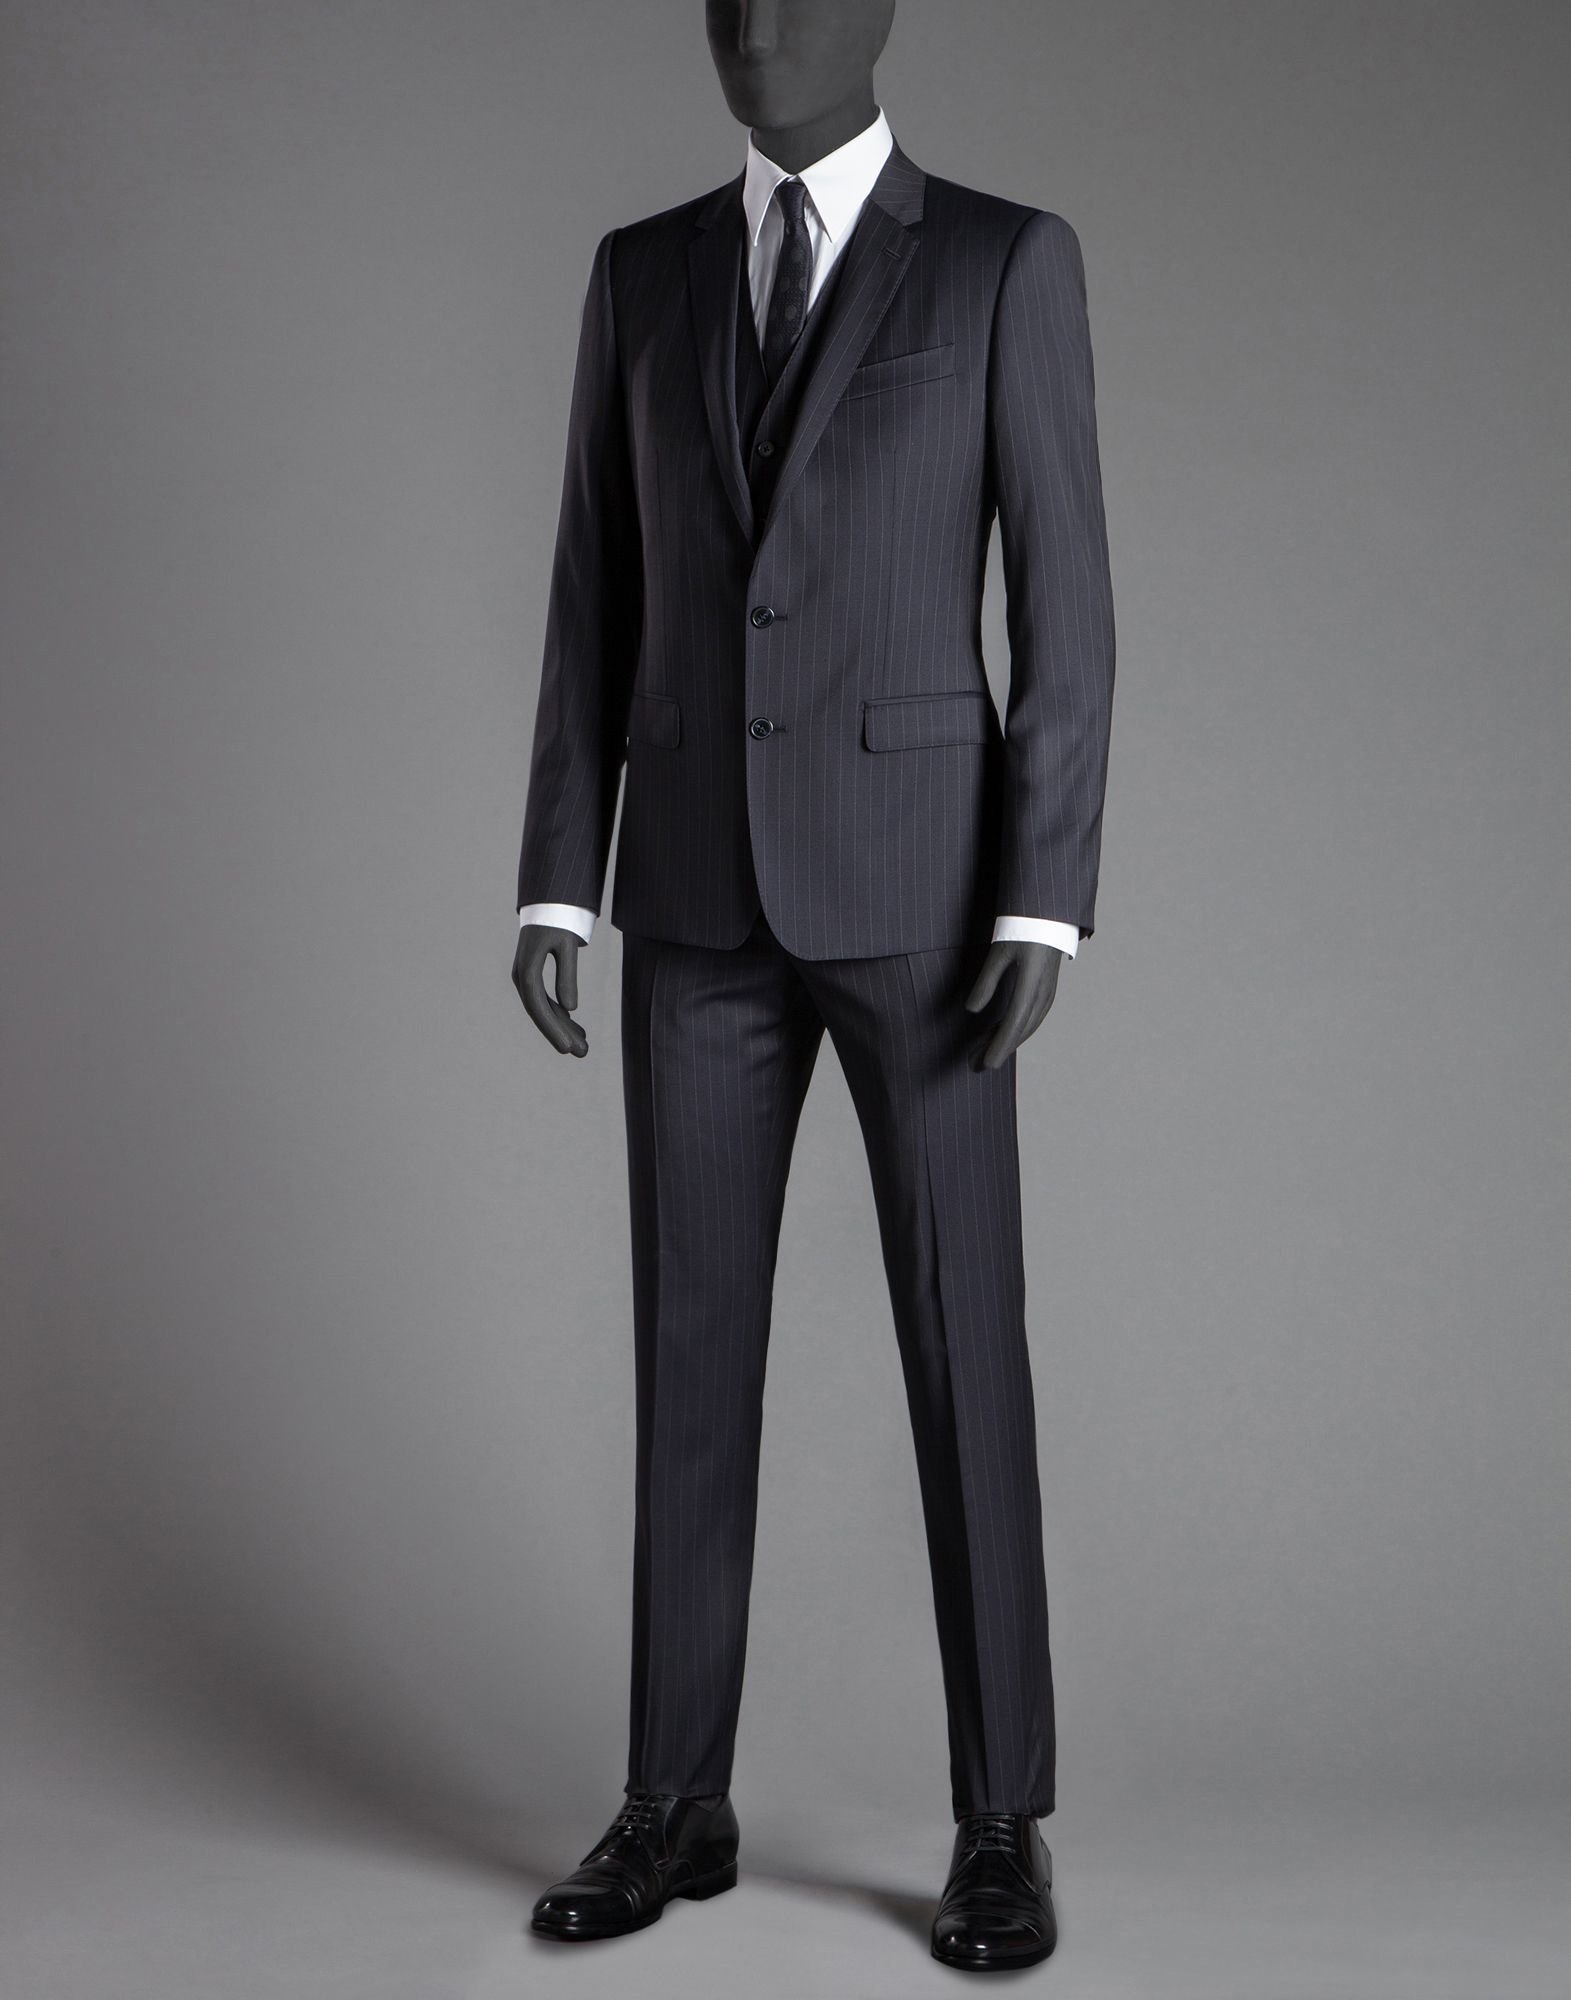 dolce and gabbana suits india